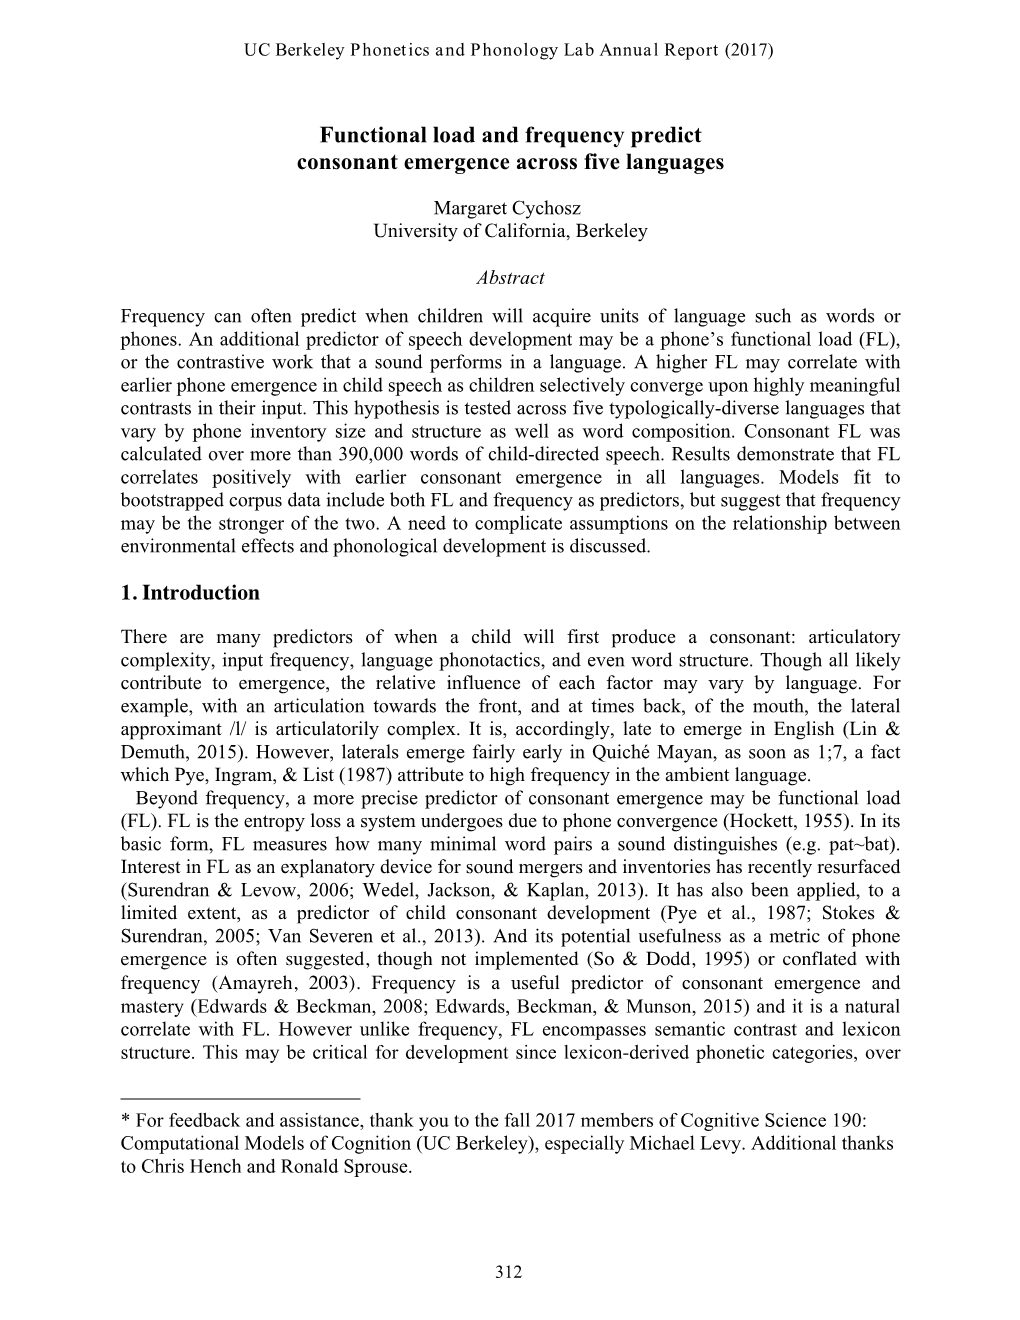 Functional Load and Frequency Predict Consonant Emergence Across Five Languages